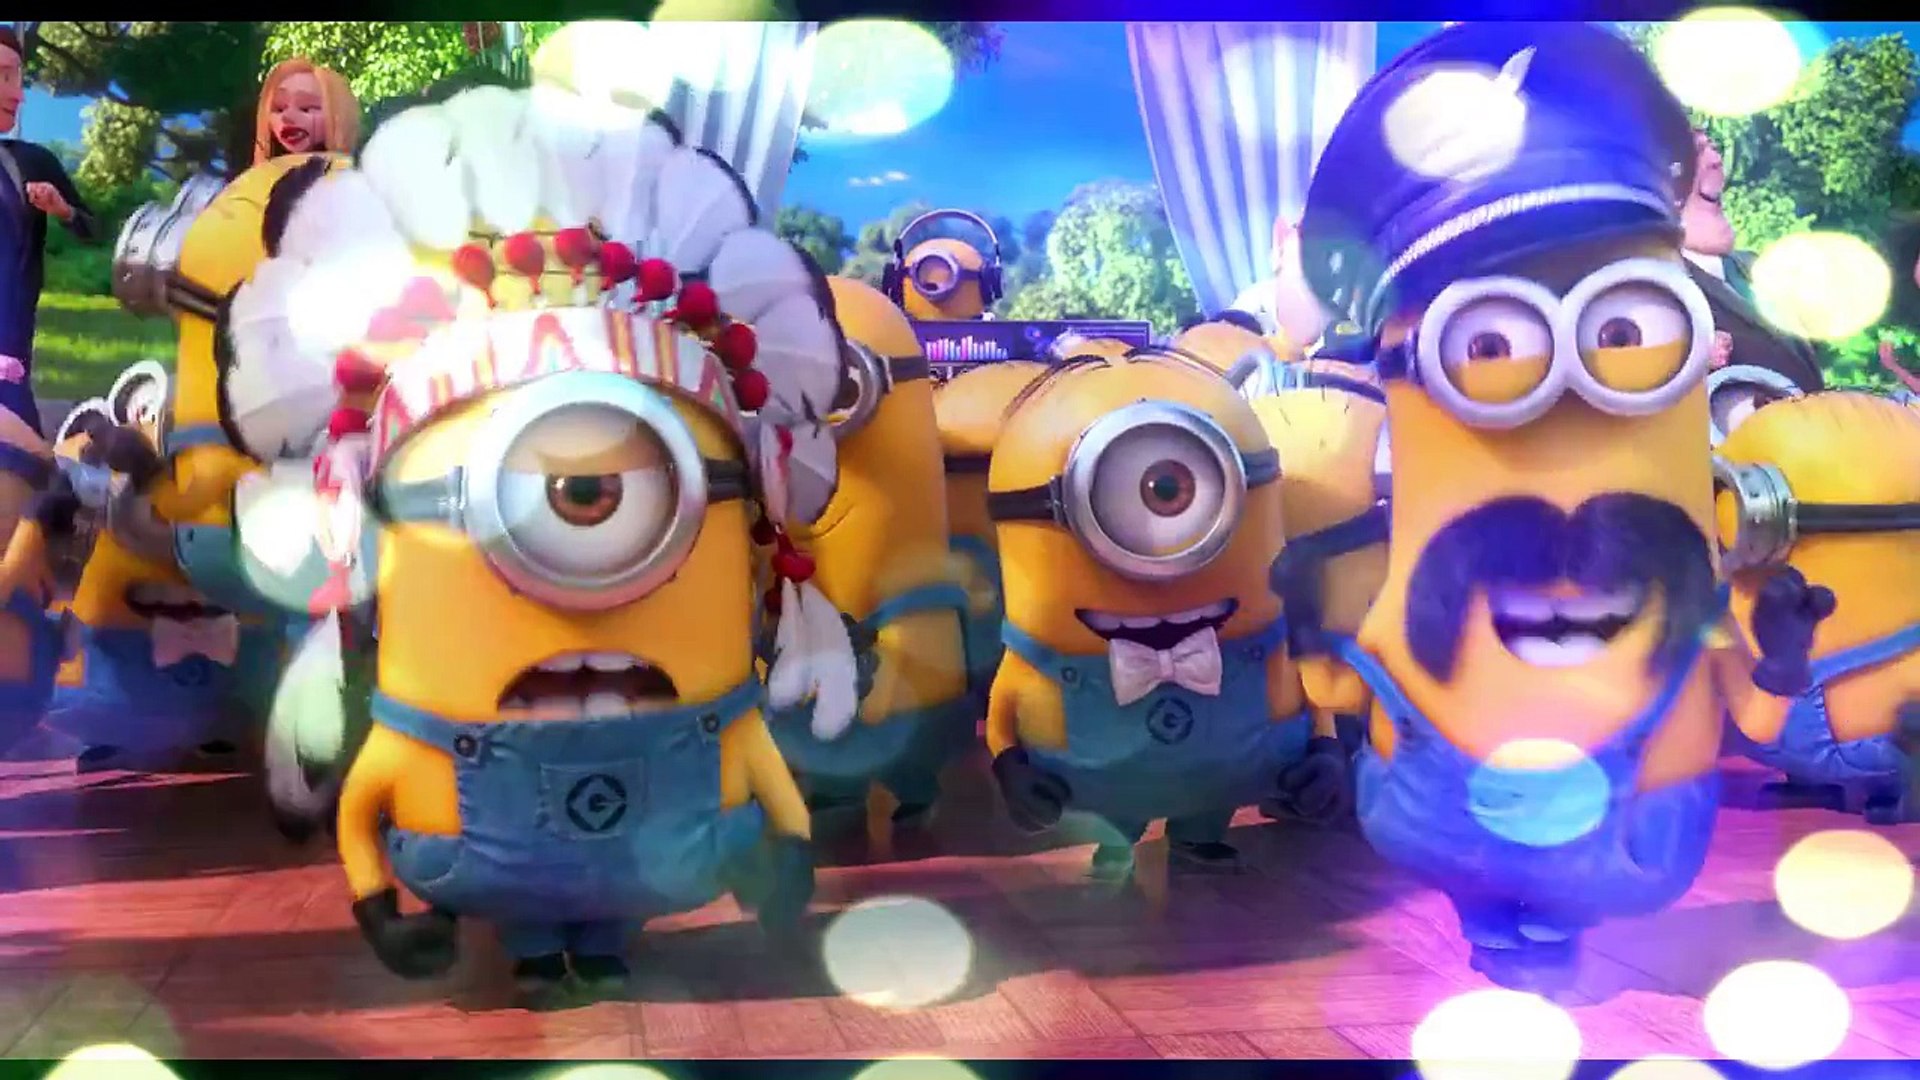 The Minions Song, Despicable Me 2